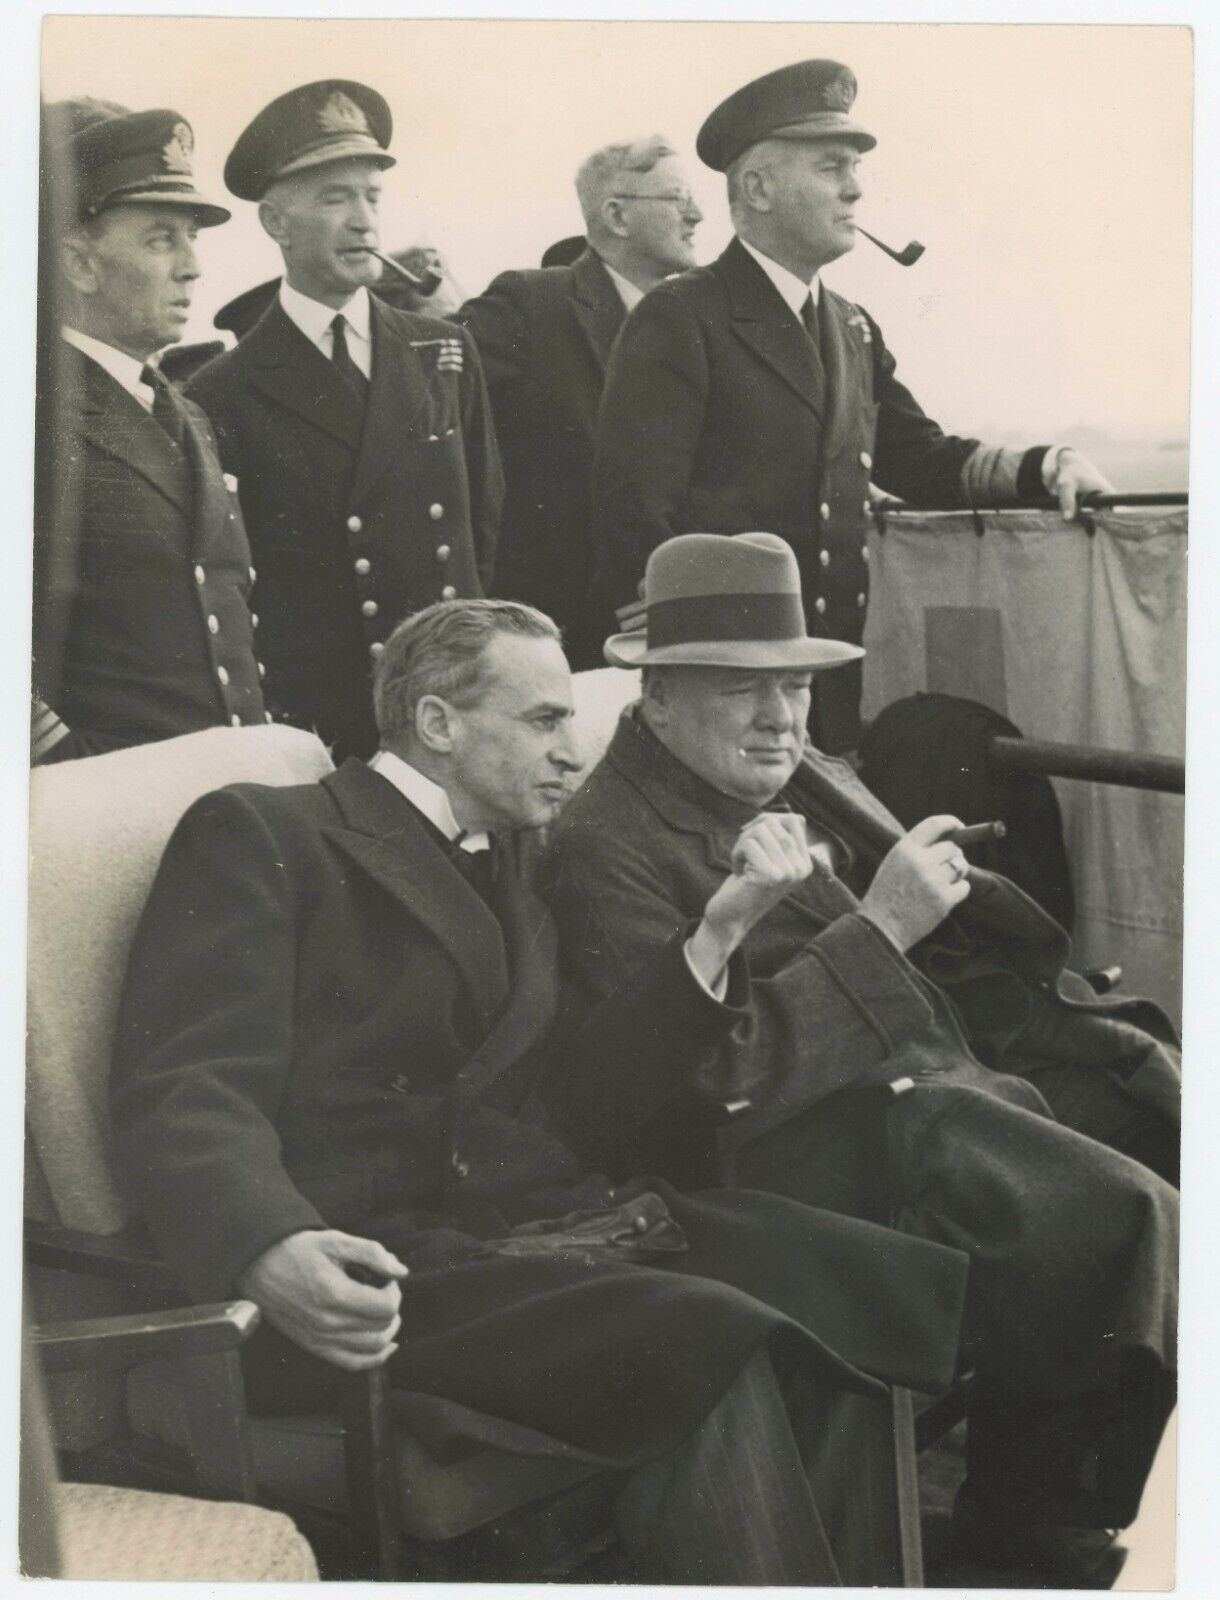 19 October 1943 press photo of Churchill watching a flying demonstration